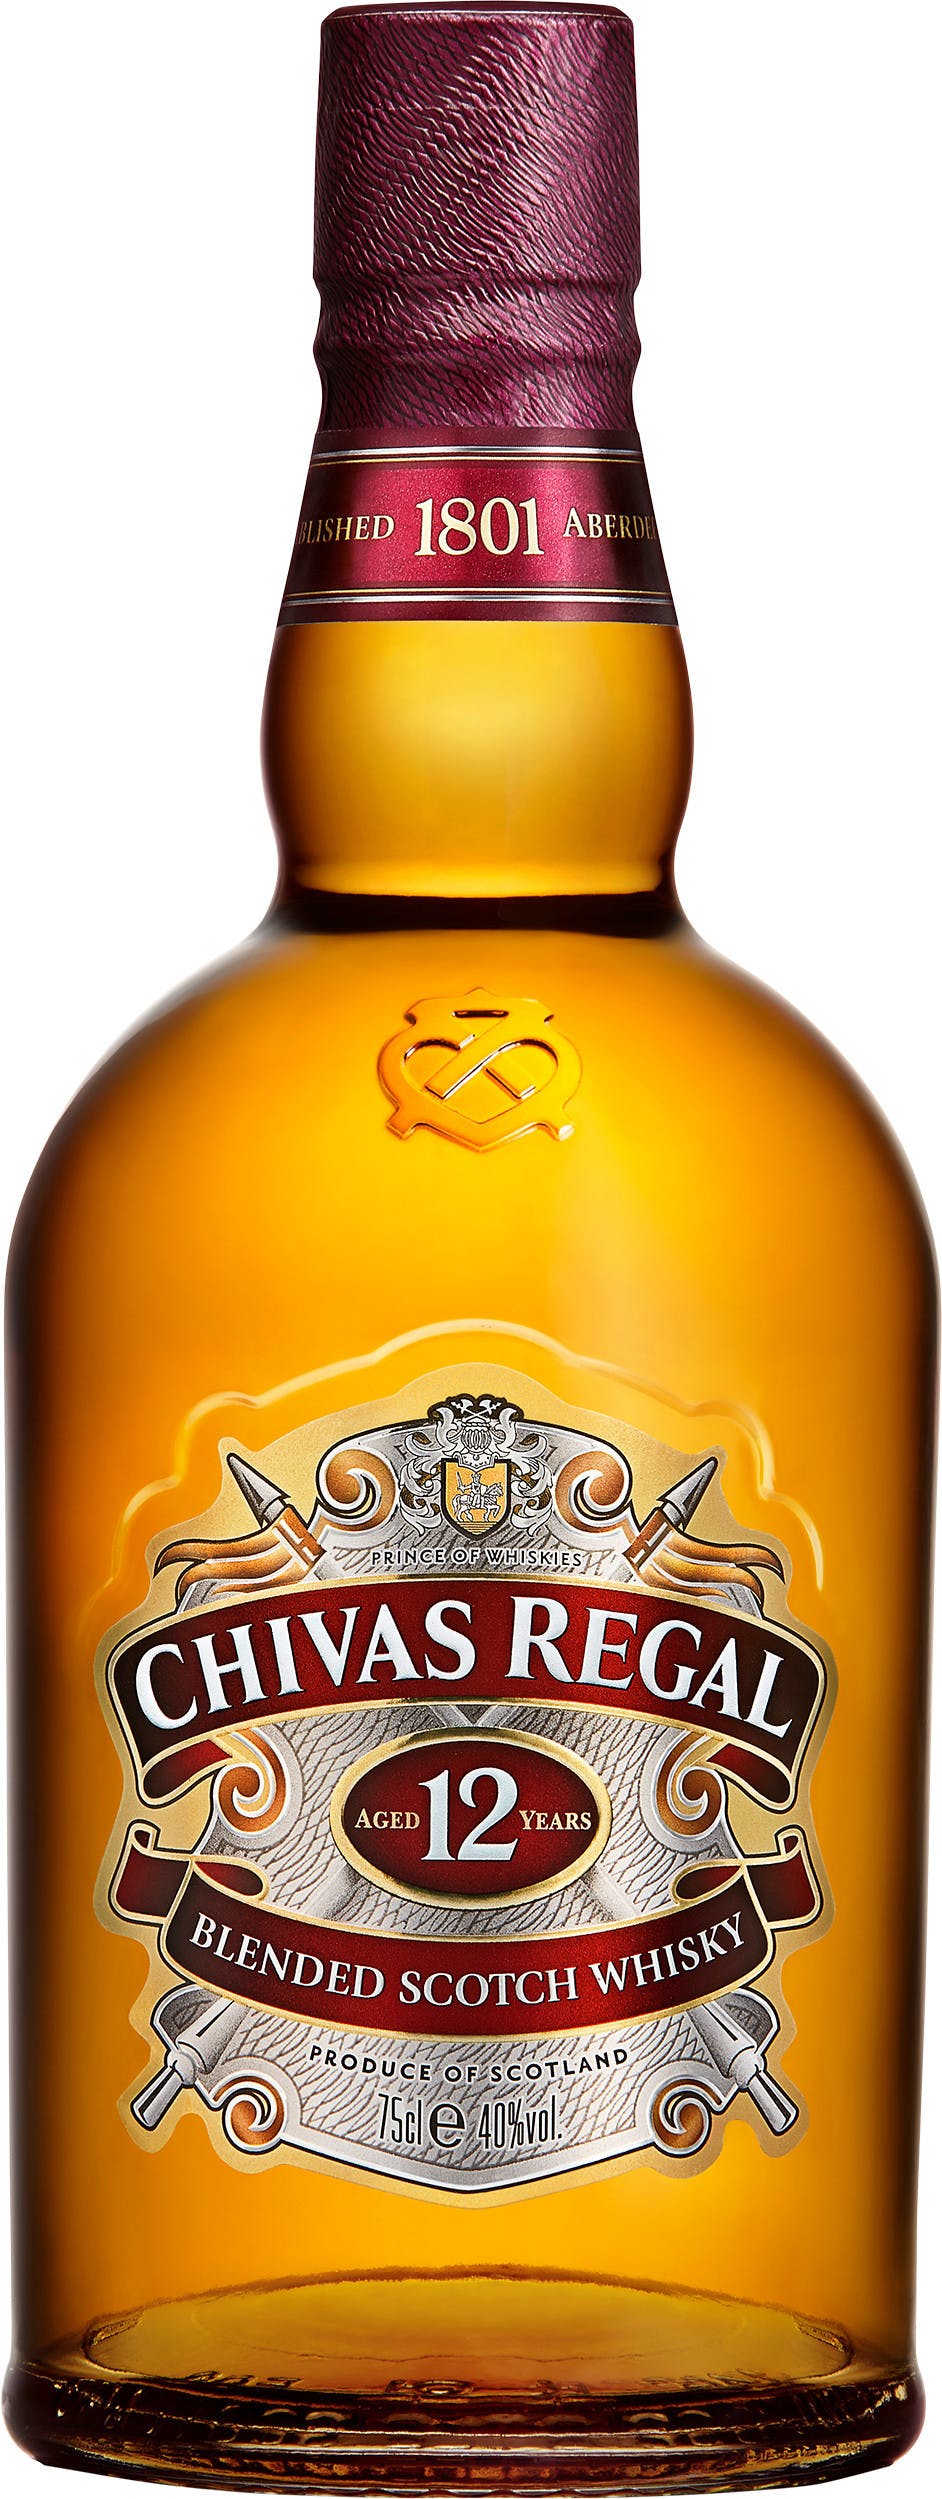 Tradition Etableret teori fjerne Chivas Regal Blended Scotch Whisky 12 year old 750ml - Garden State  Discount Liquors